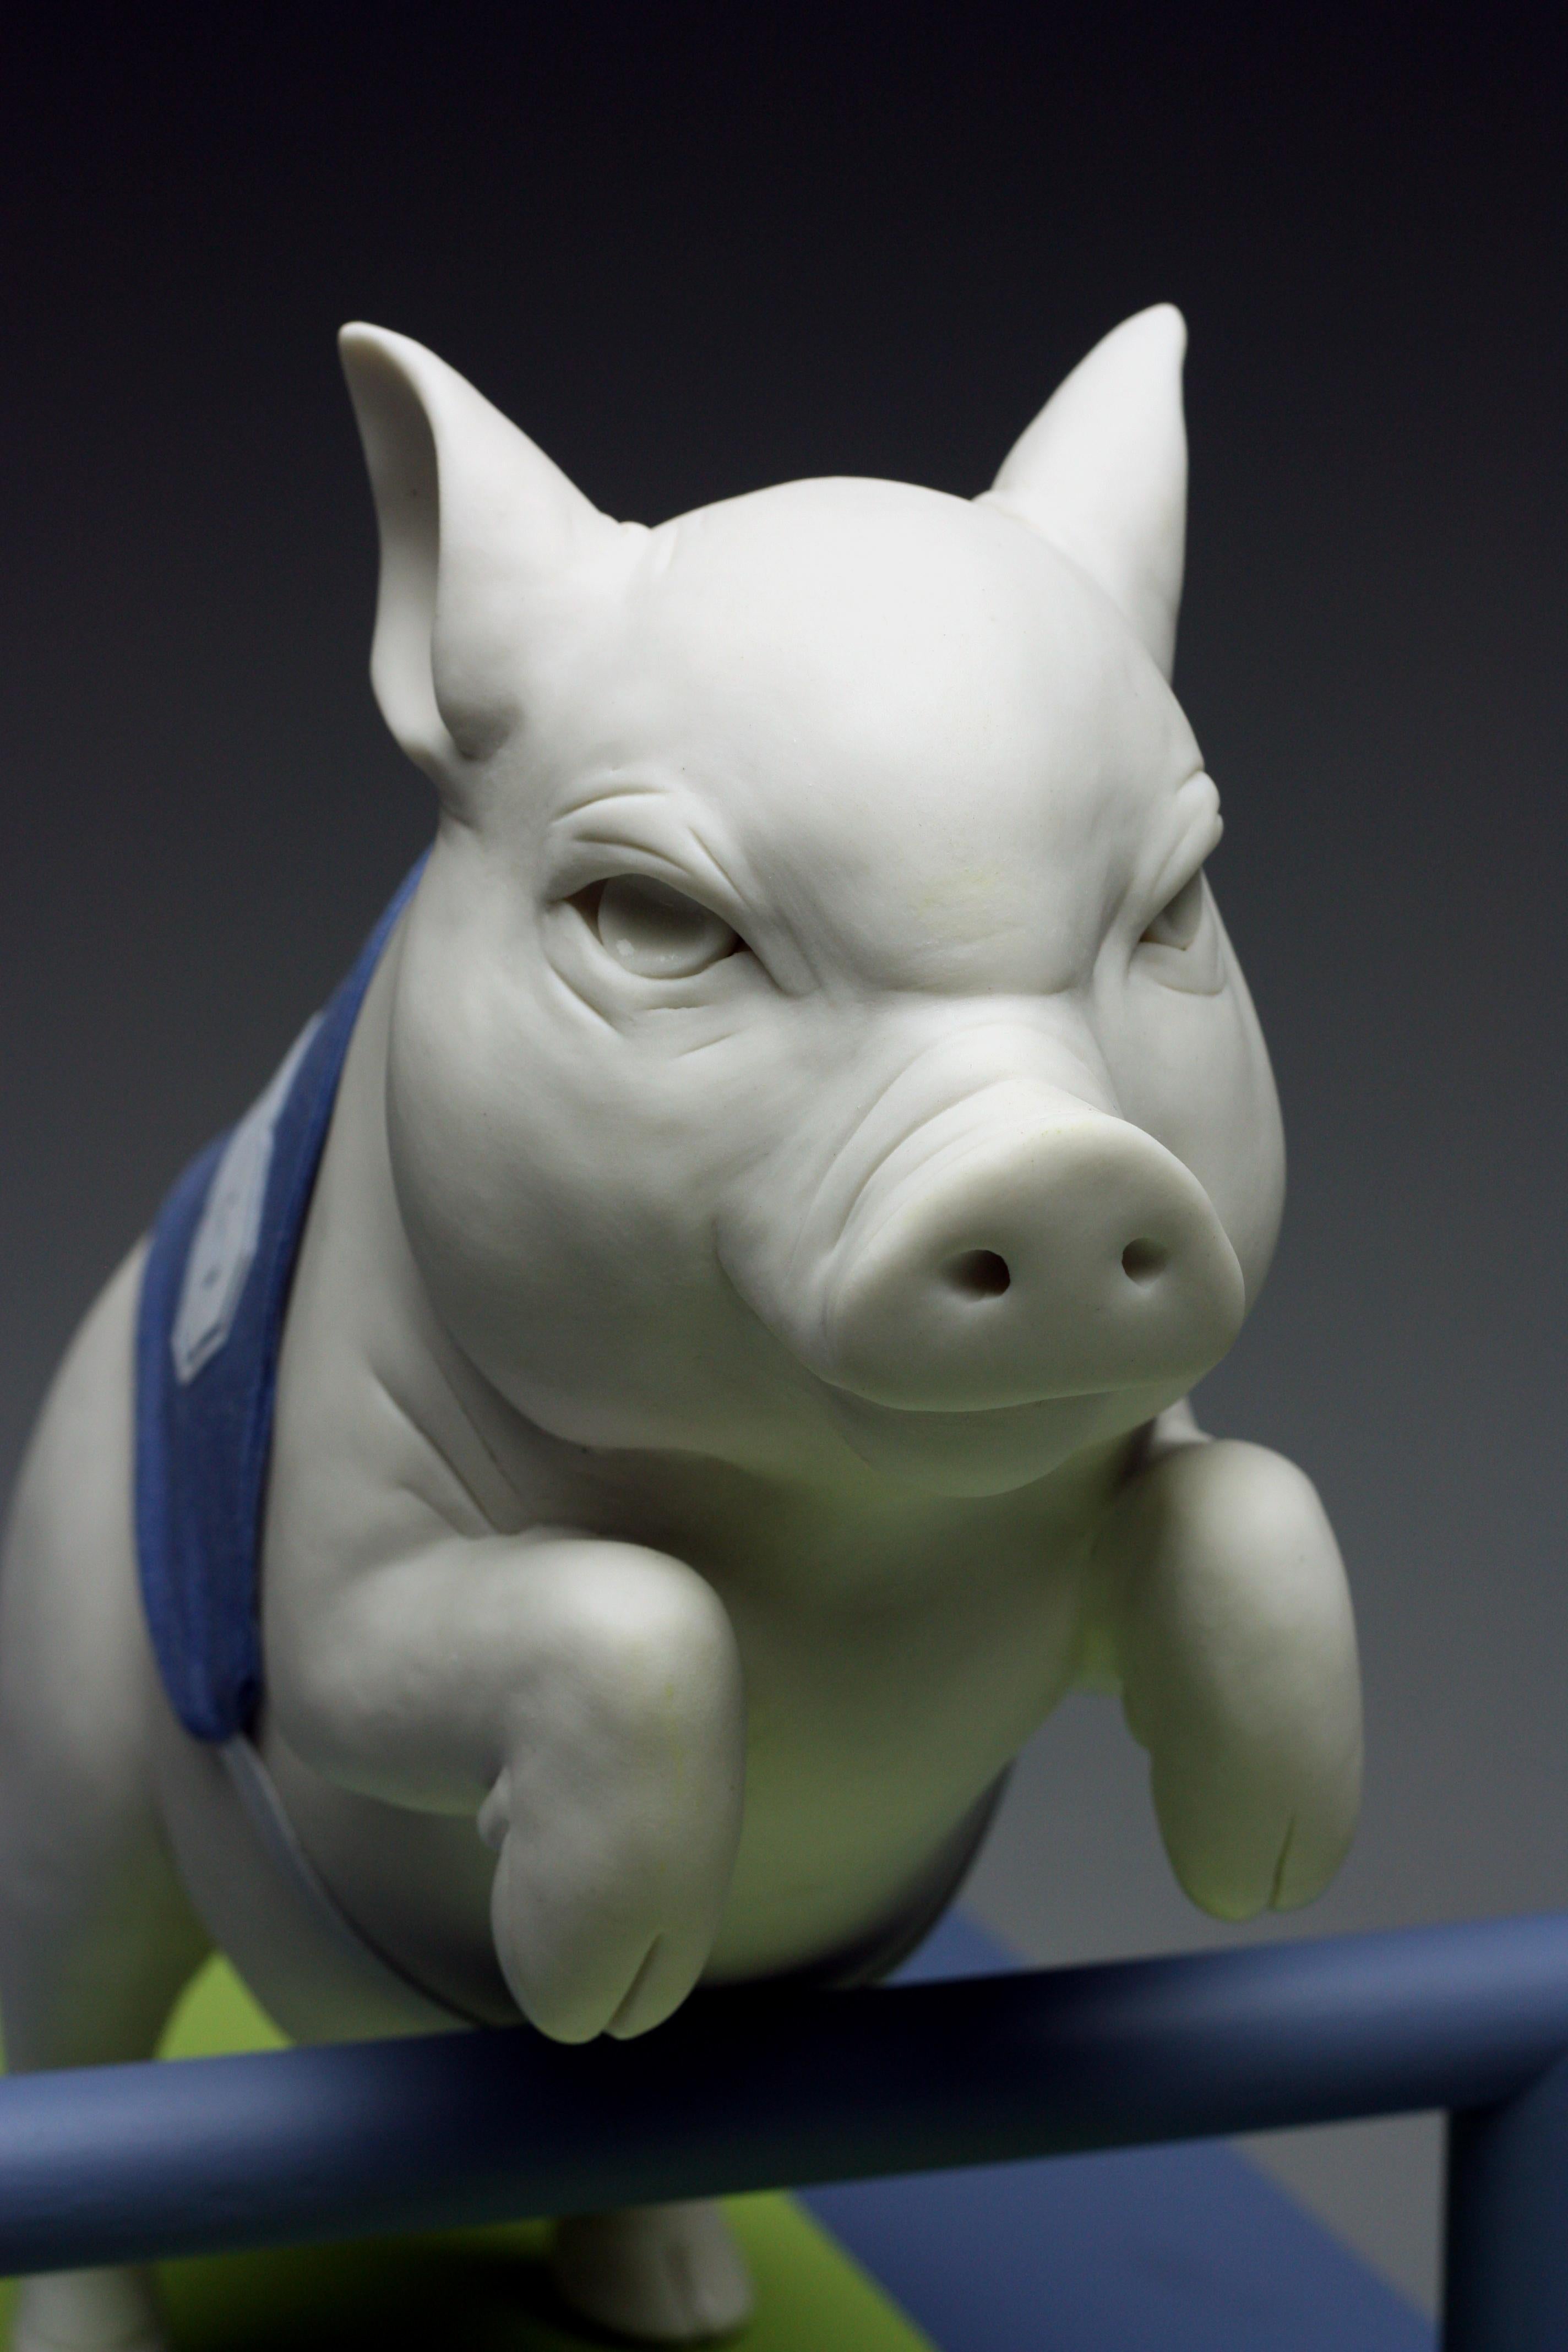 White Porcelain Pig Jumping a Hurdle "Underdog" by Bethany Krull